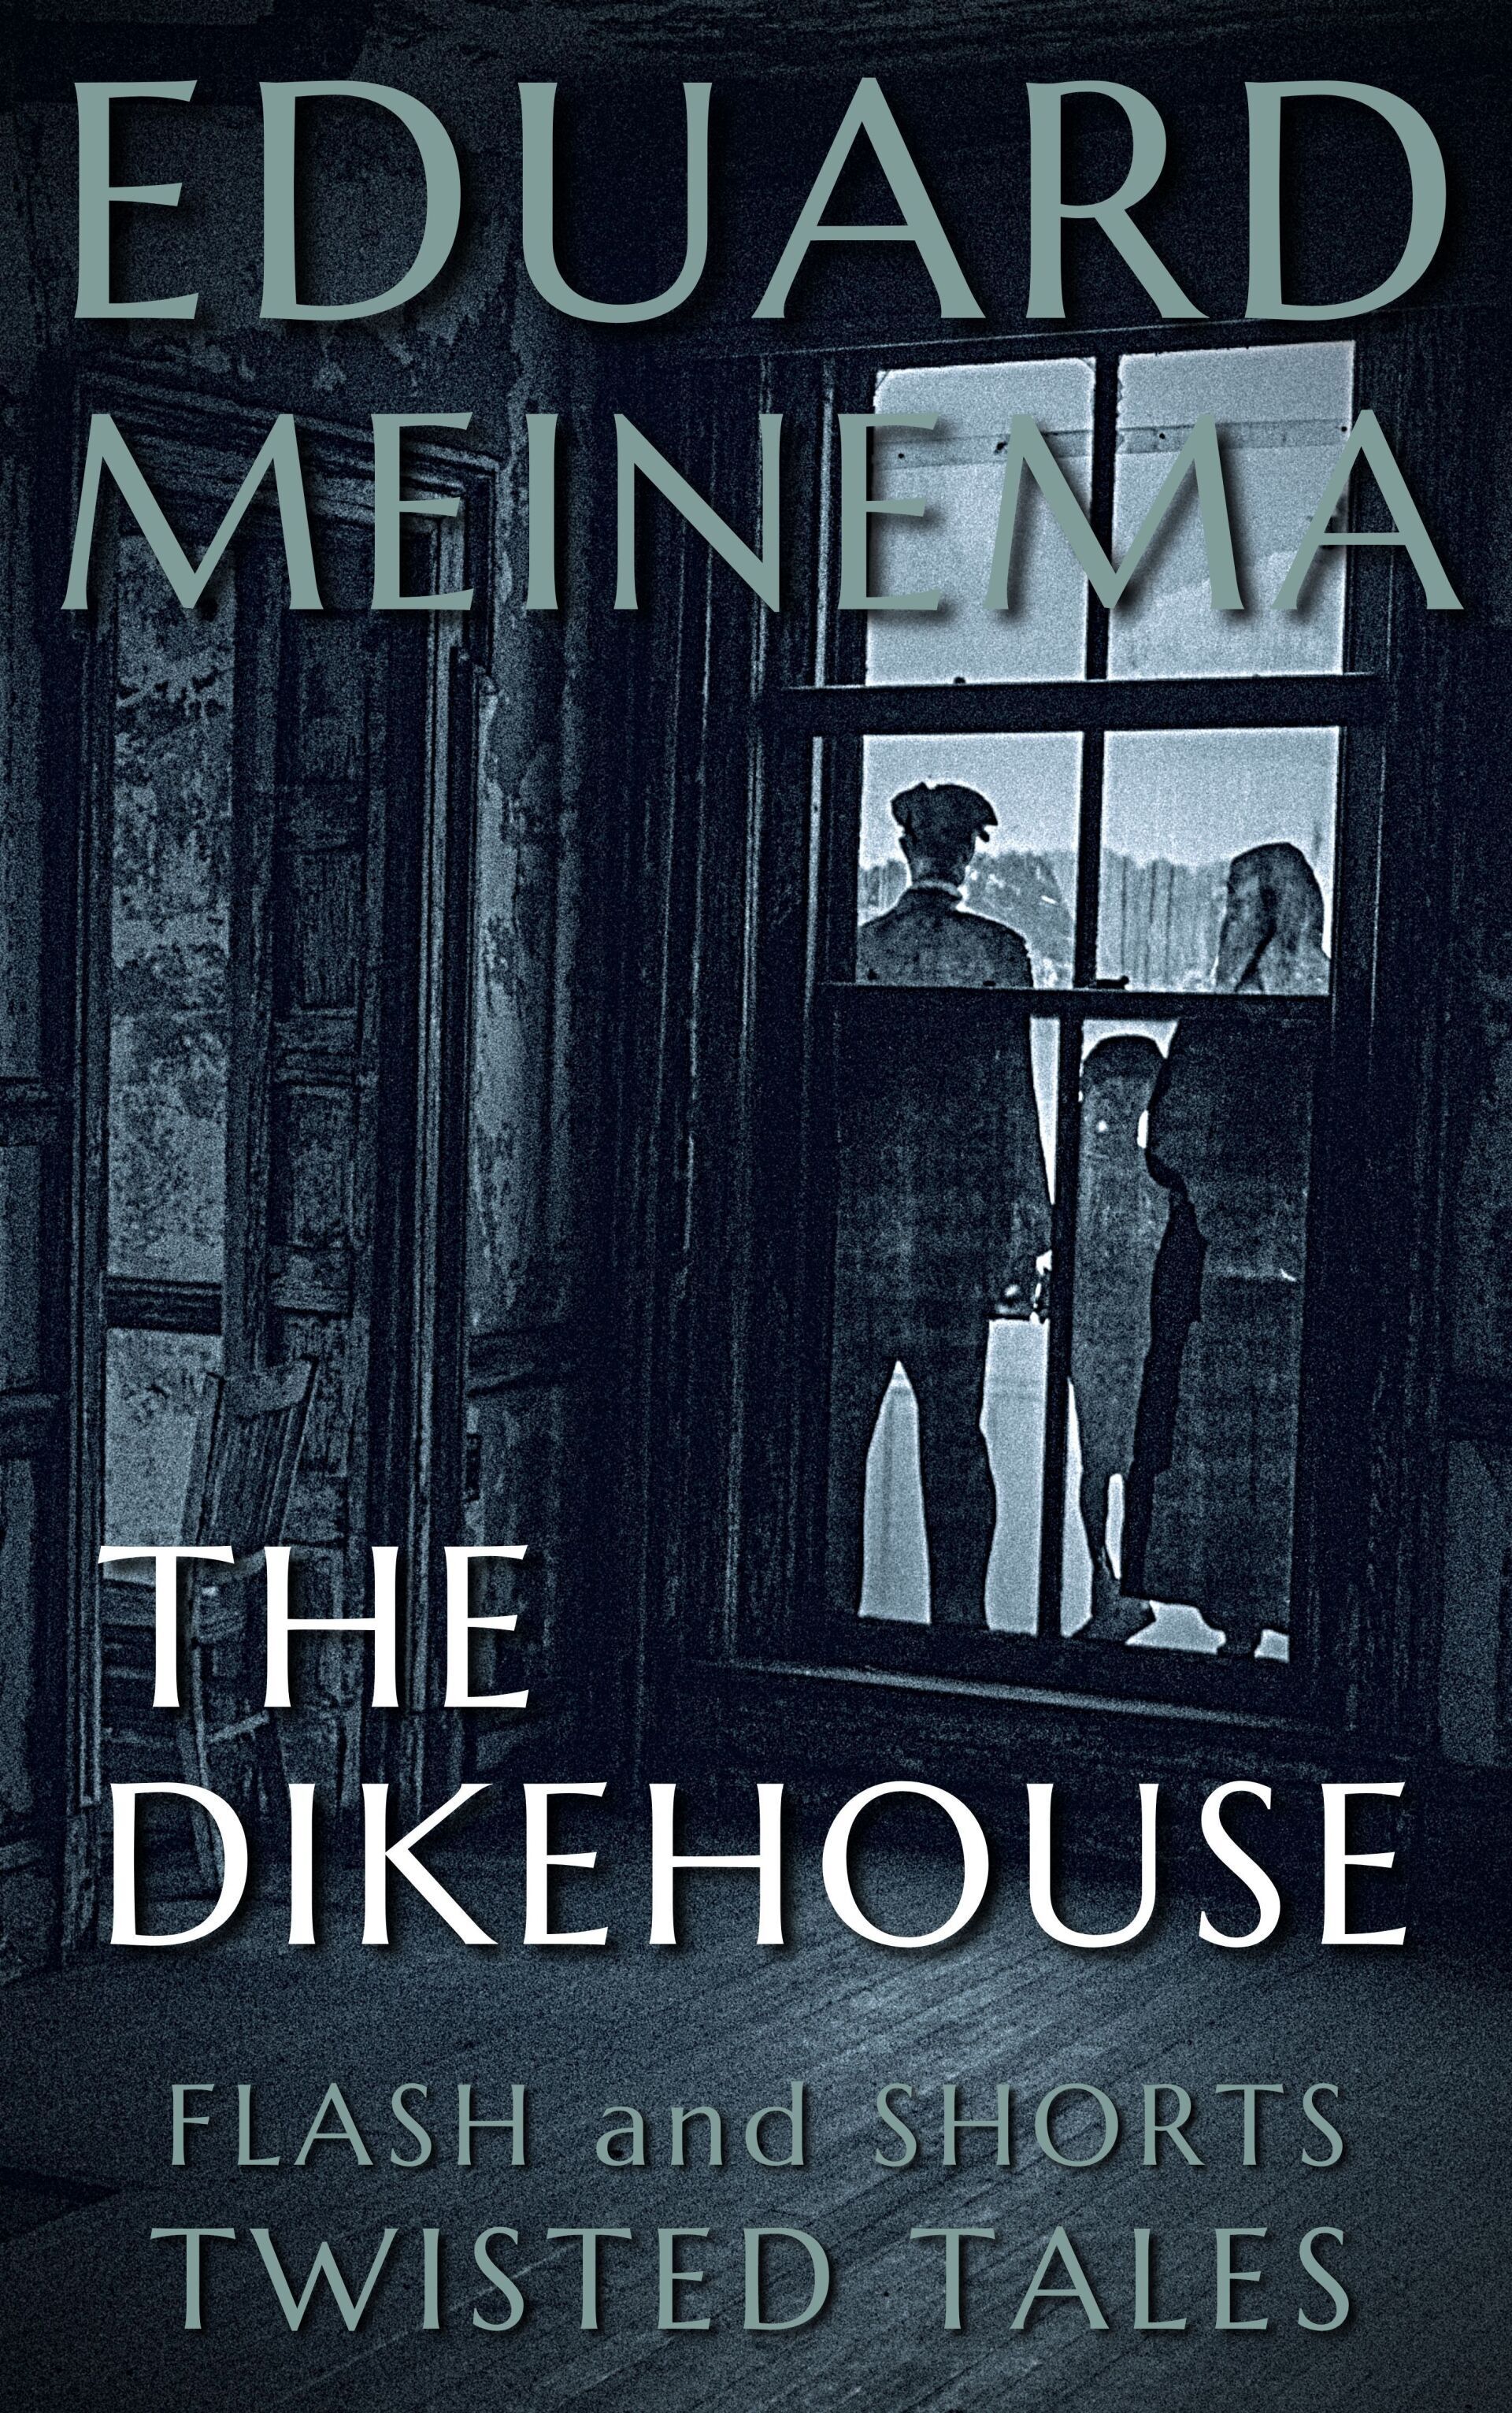 The Dikehouse, short story by Eduard Meinema.